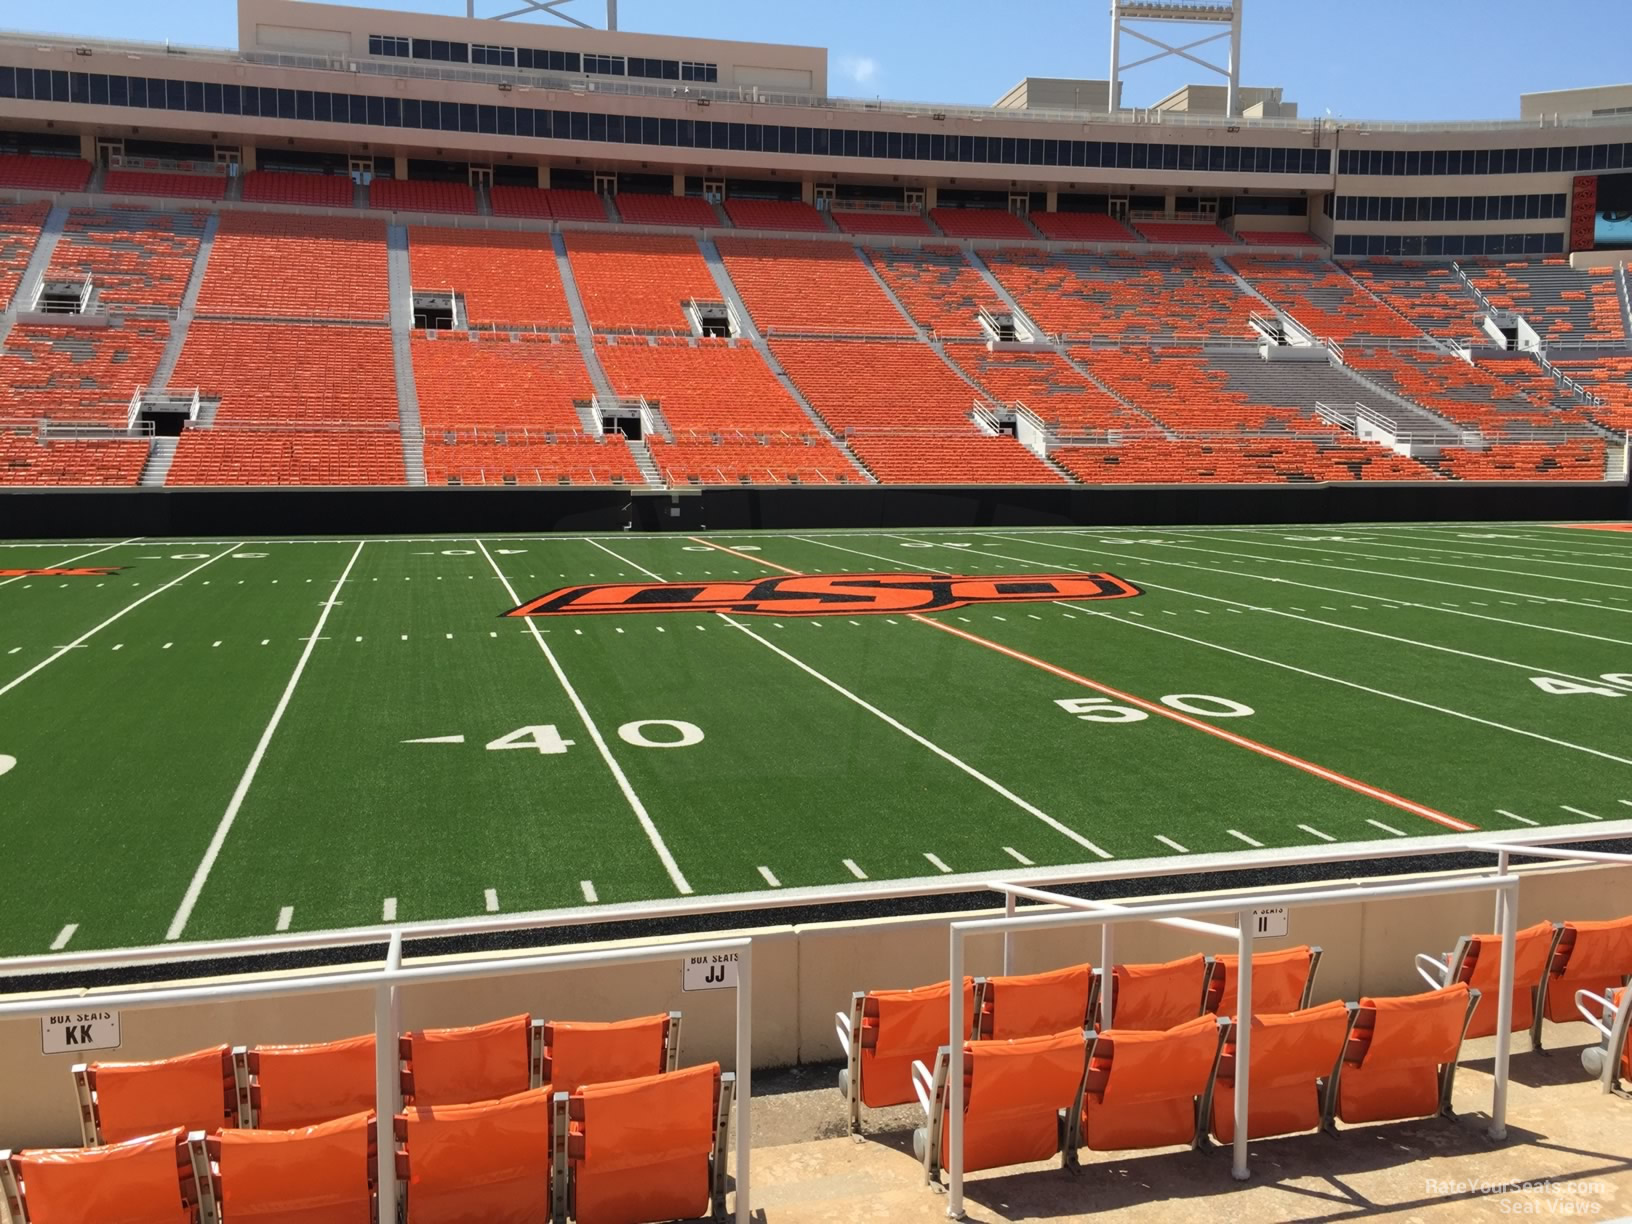 section 118, row 10 seat view  - boone pickens stadium